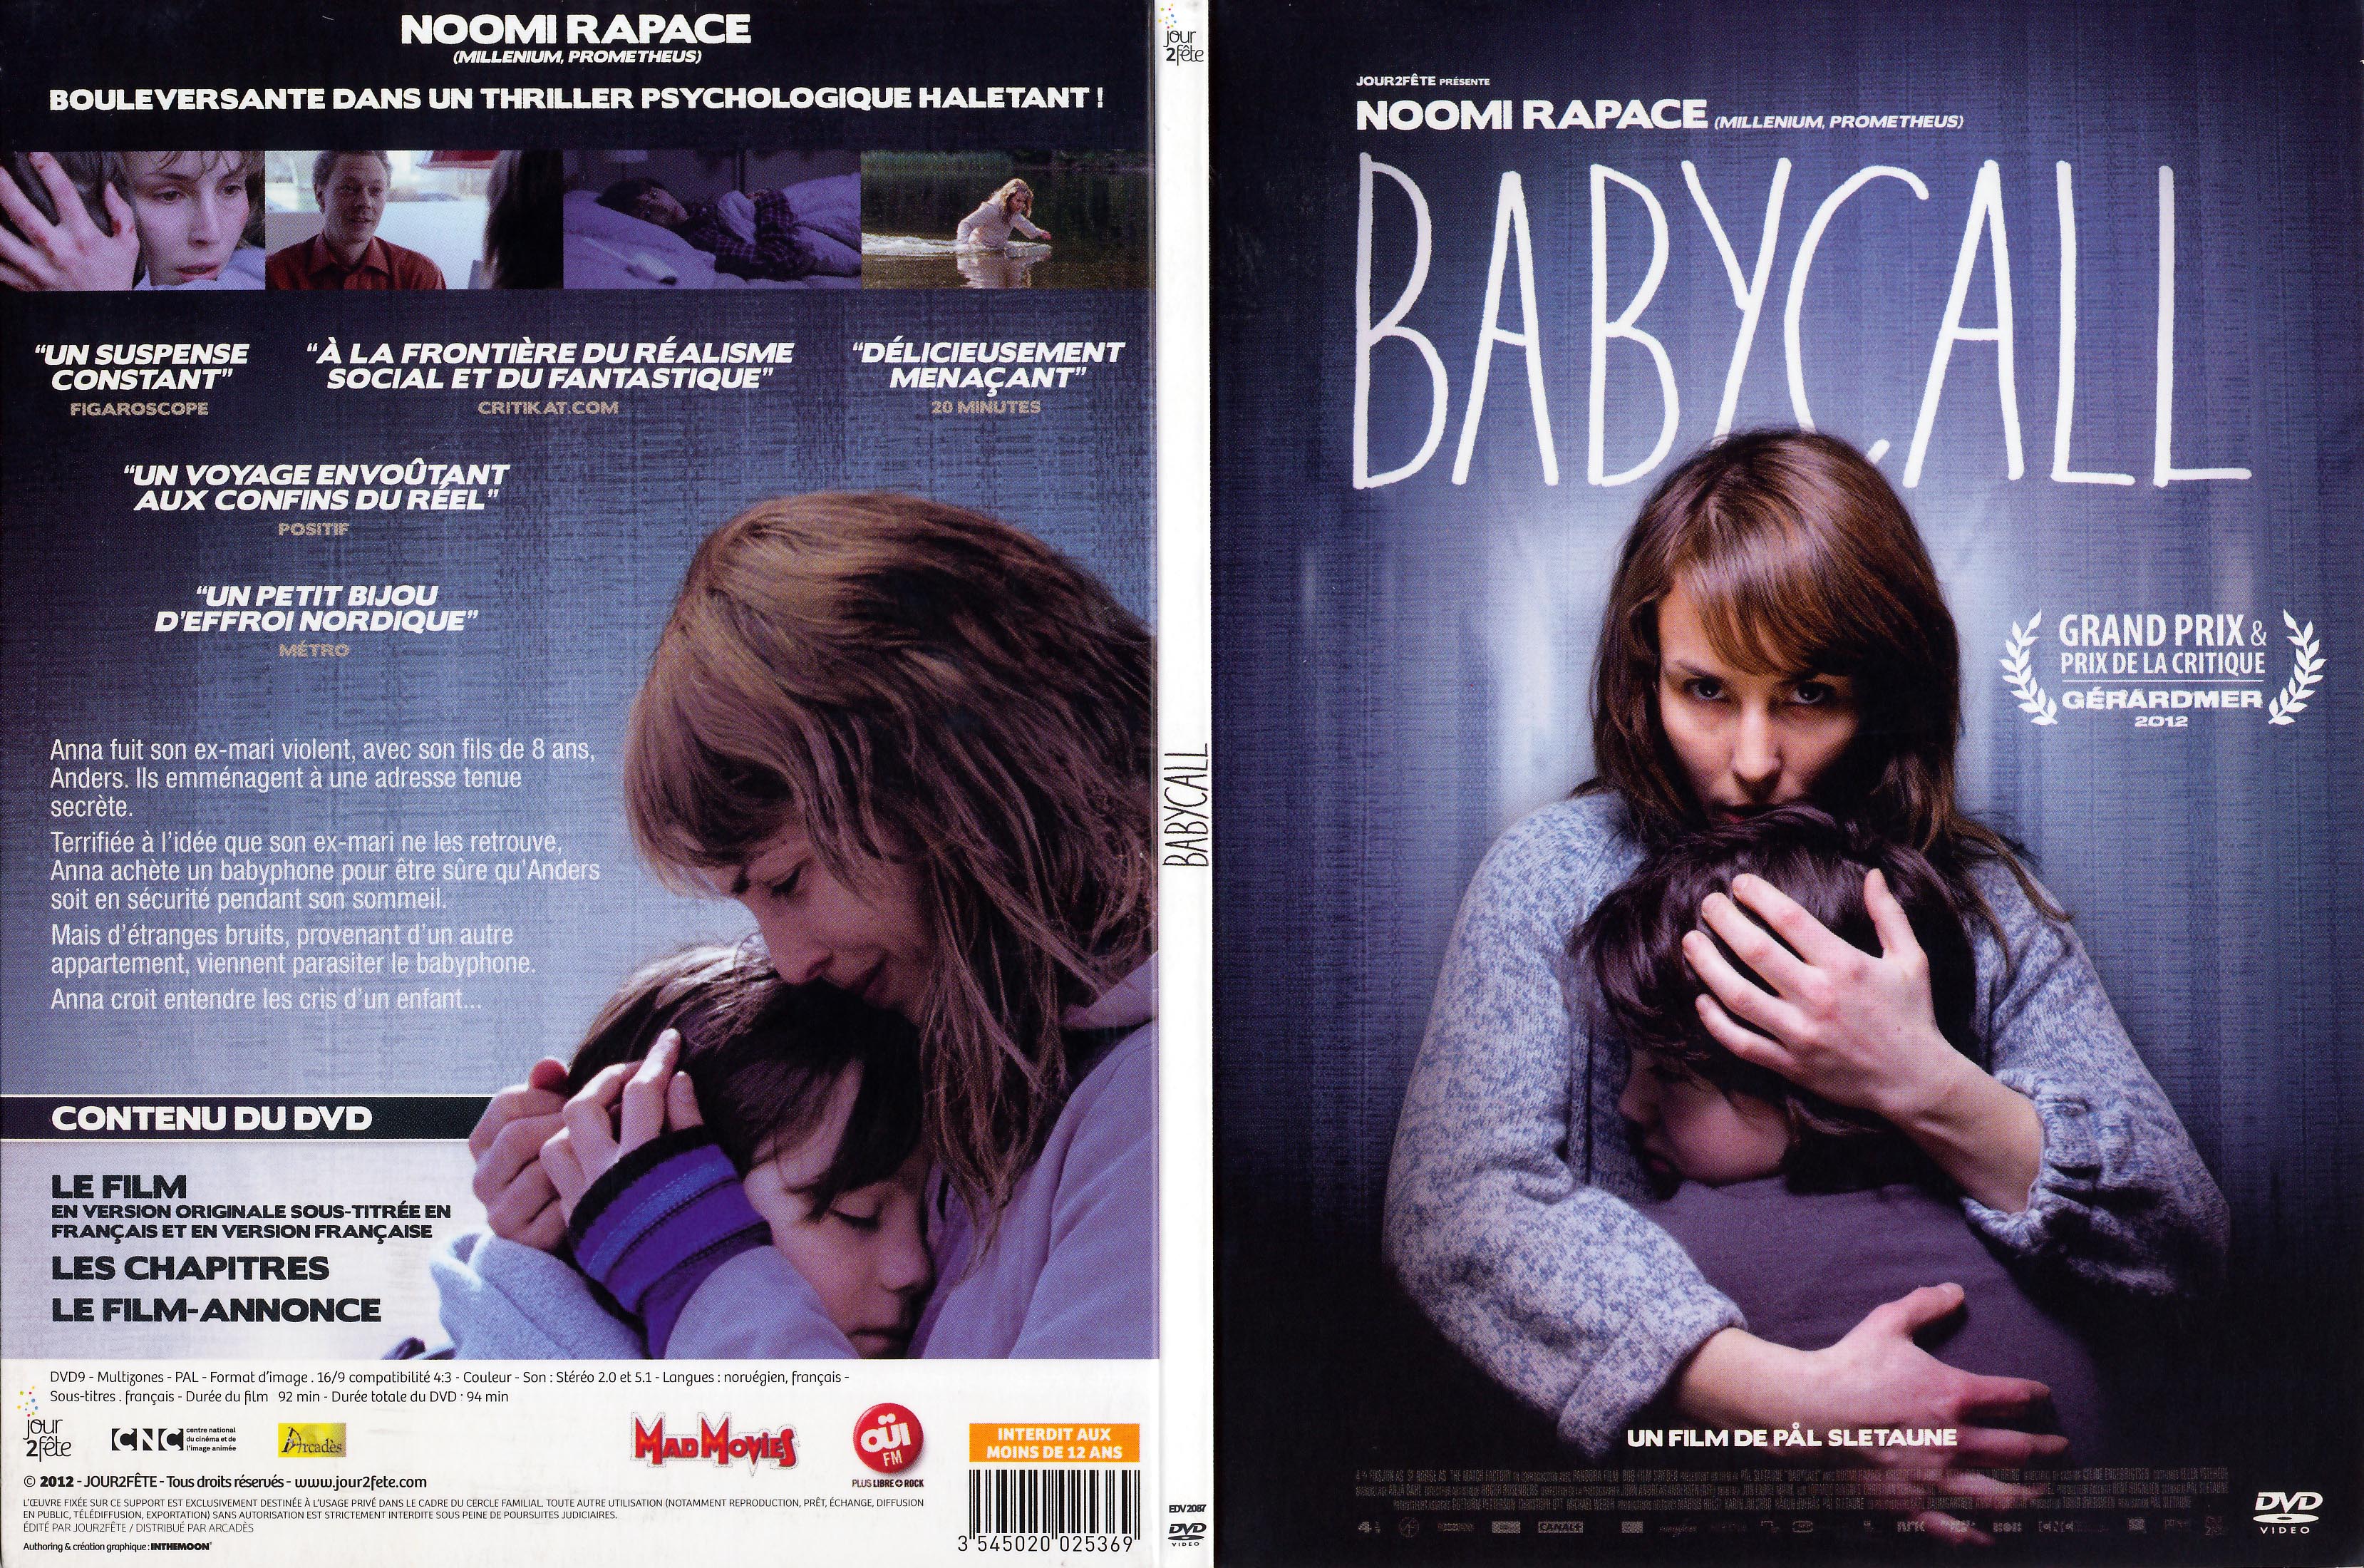 Jaquette DVD Babycall